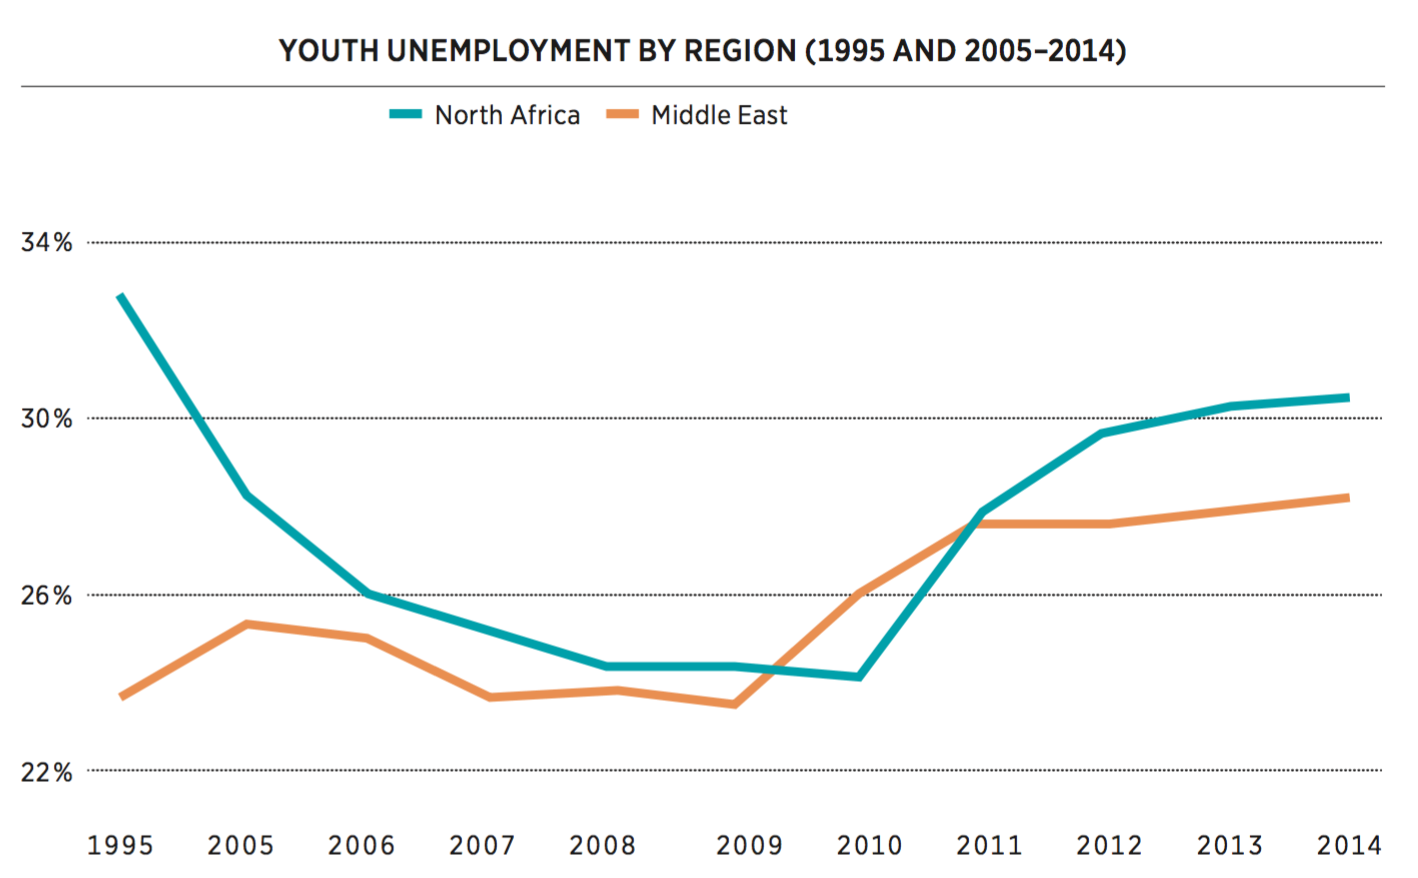 Youth unemployment in the Middle East and North Africa region is the highest in the world. 